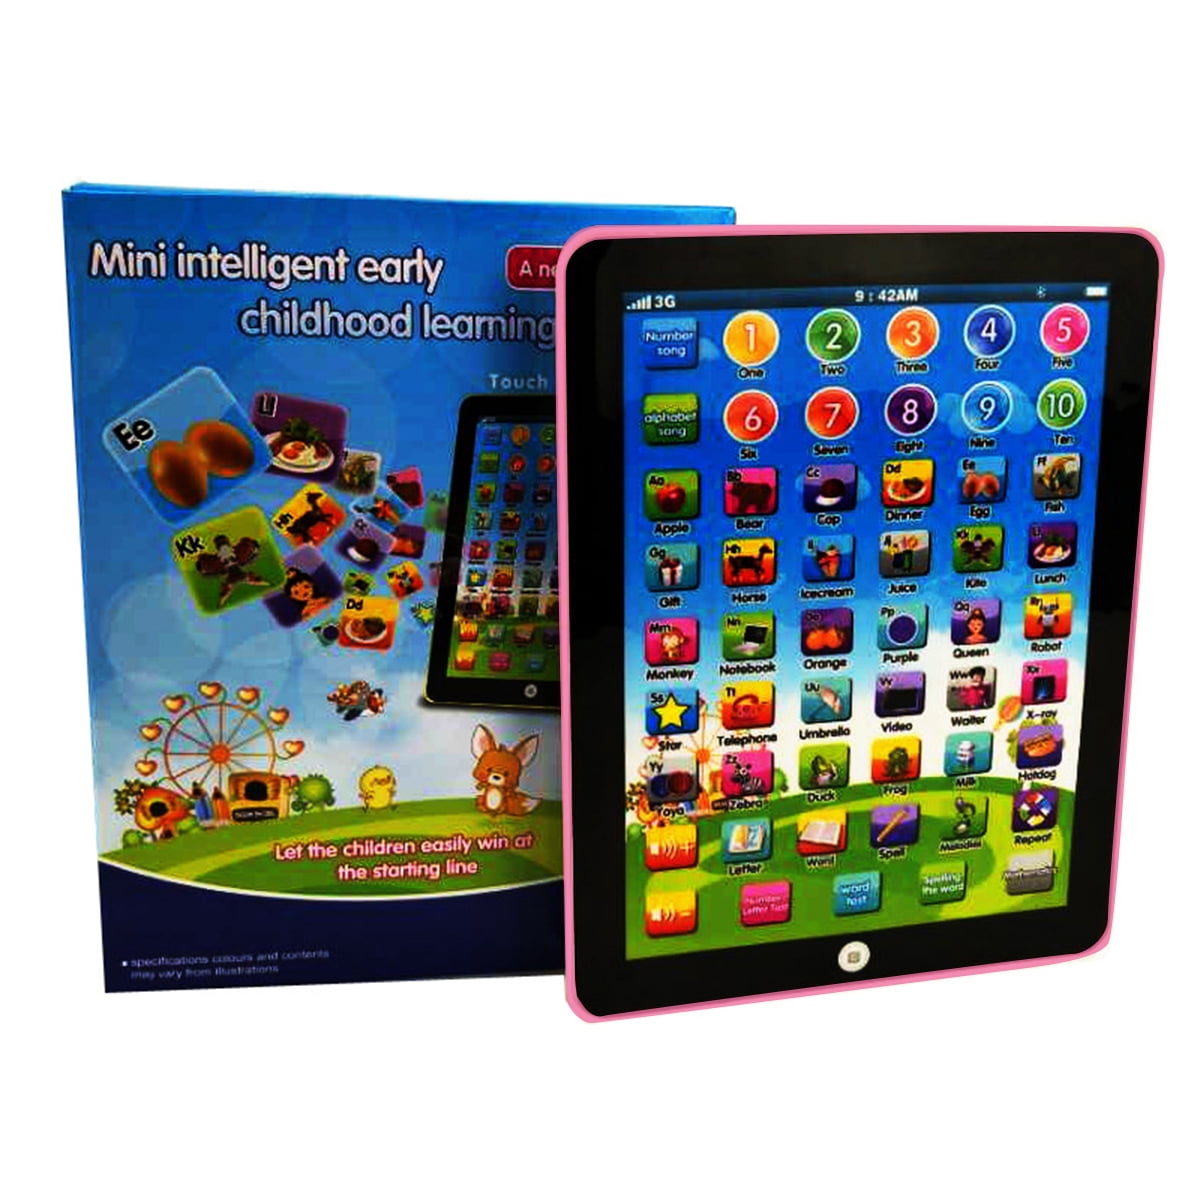 KIDS CHILDRENS iPad FIRST TABLET EDUCATIONAL TOUCH SCREEN LEARNING COMPUTER TOY 